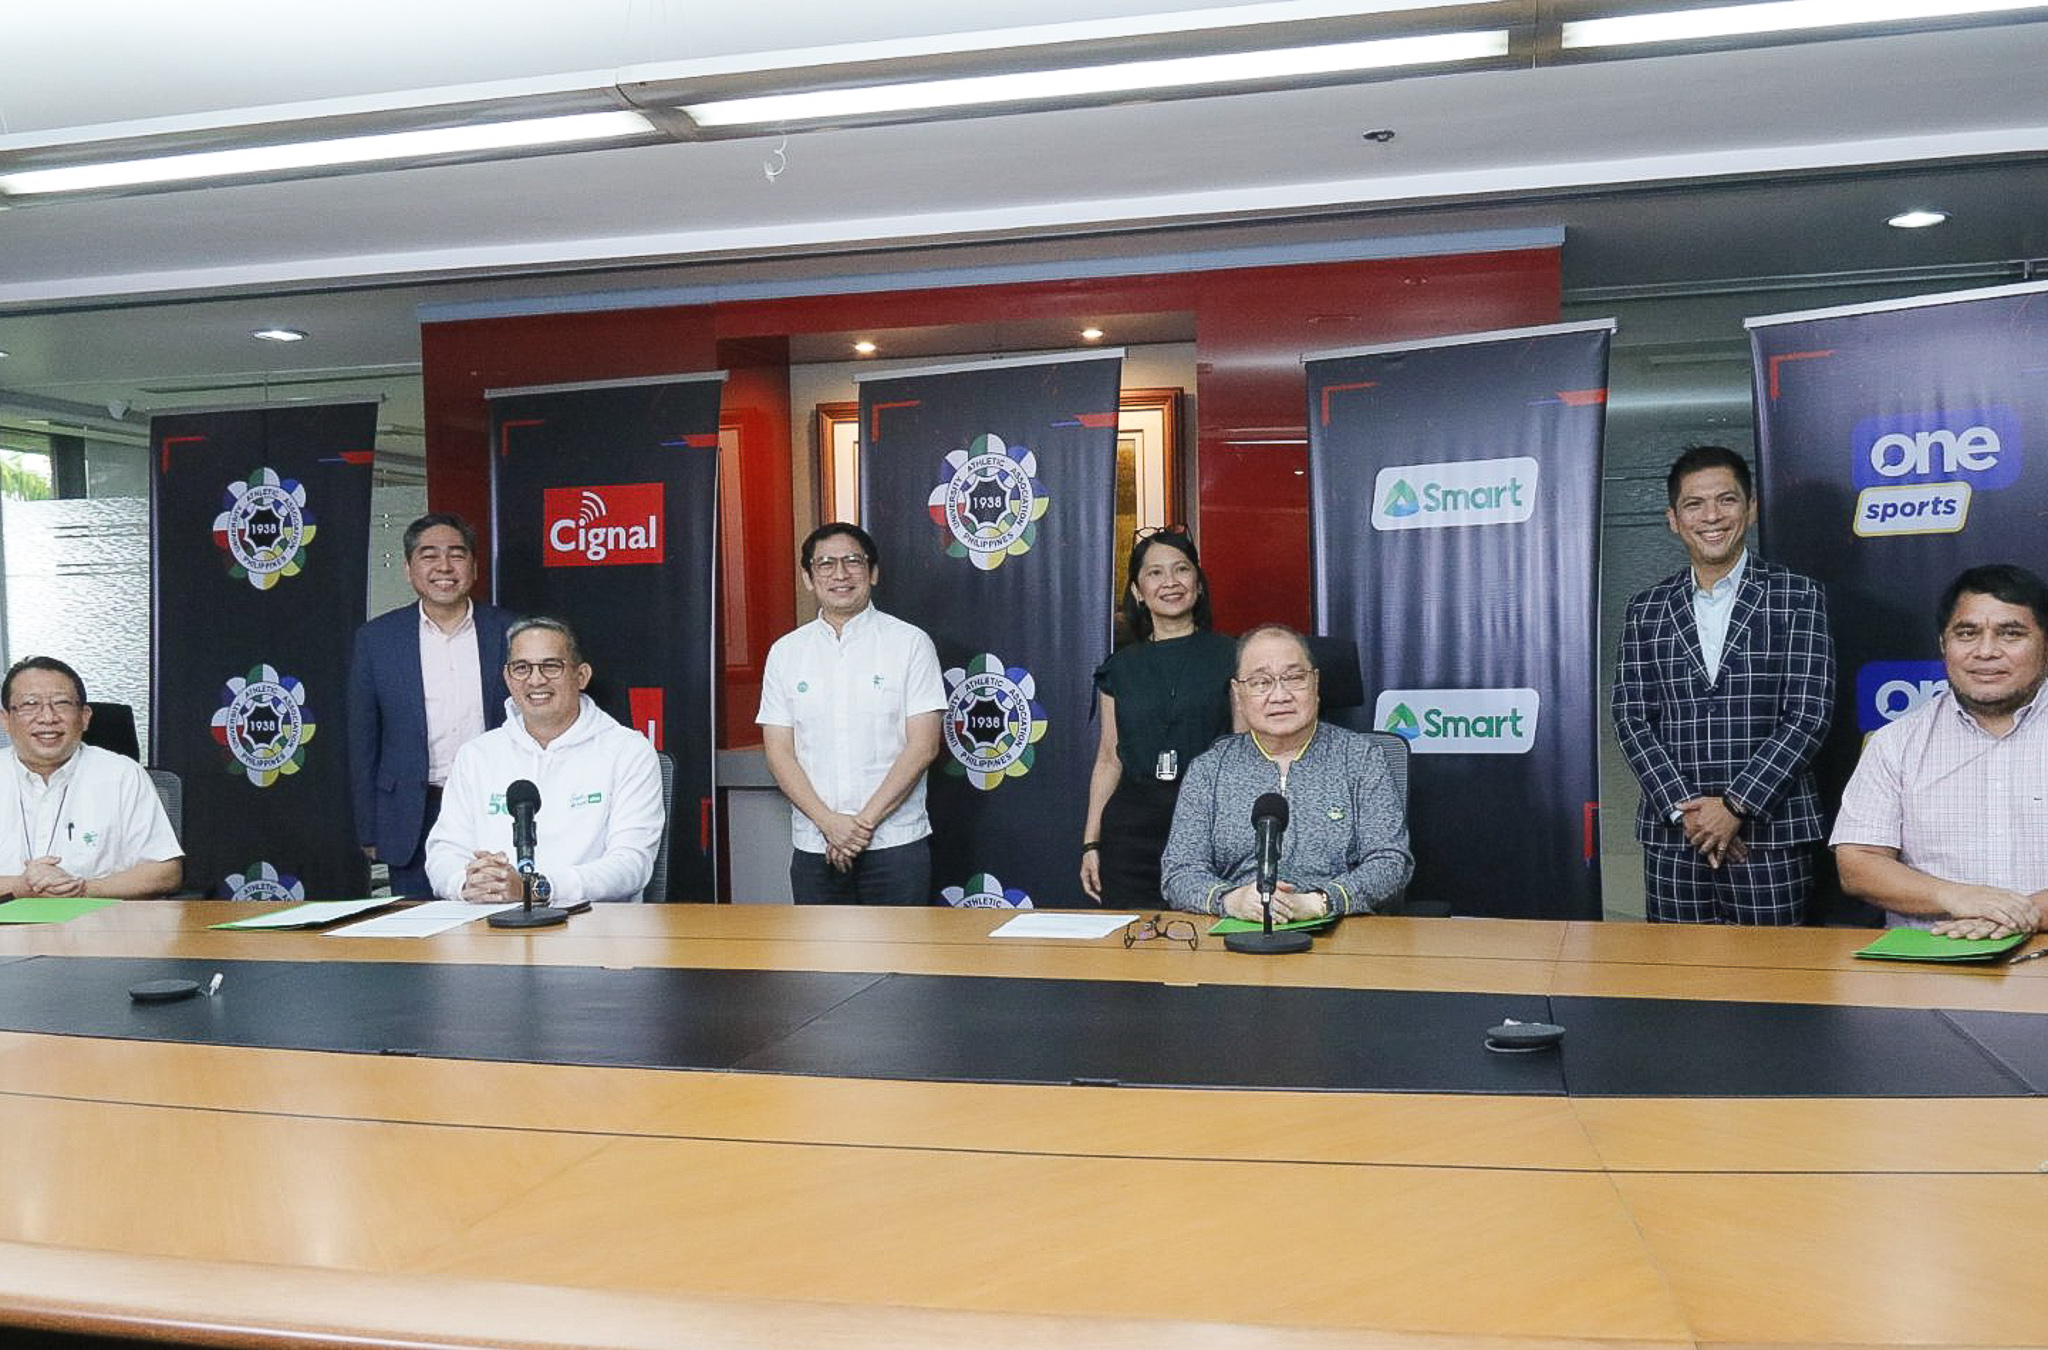 UAAP inks long-term pact with Cignal TV and Smart